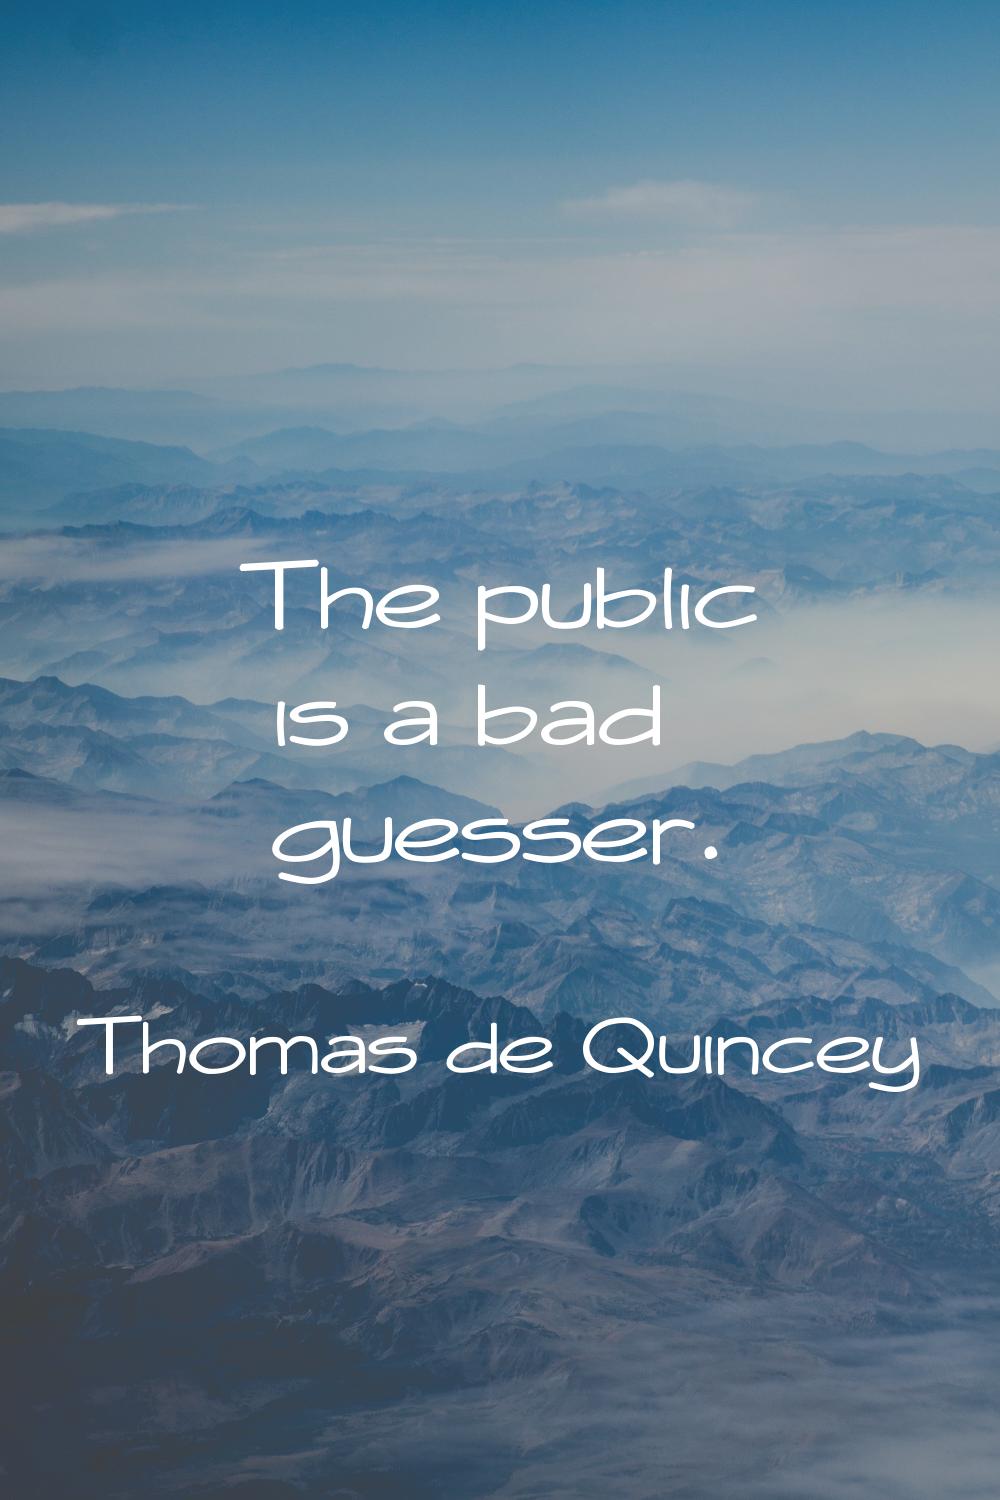 The public is a bad guesser.